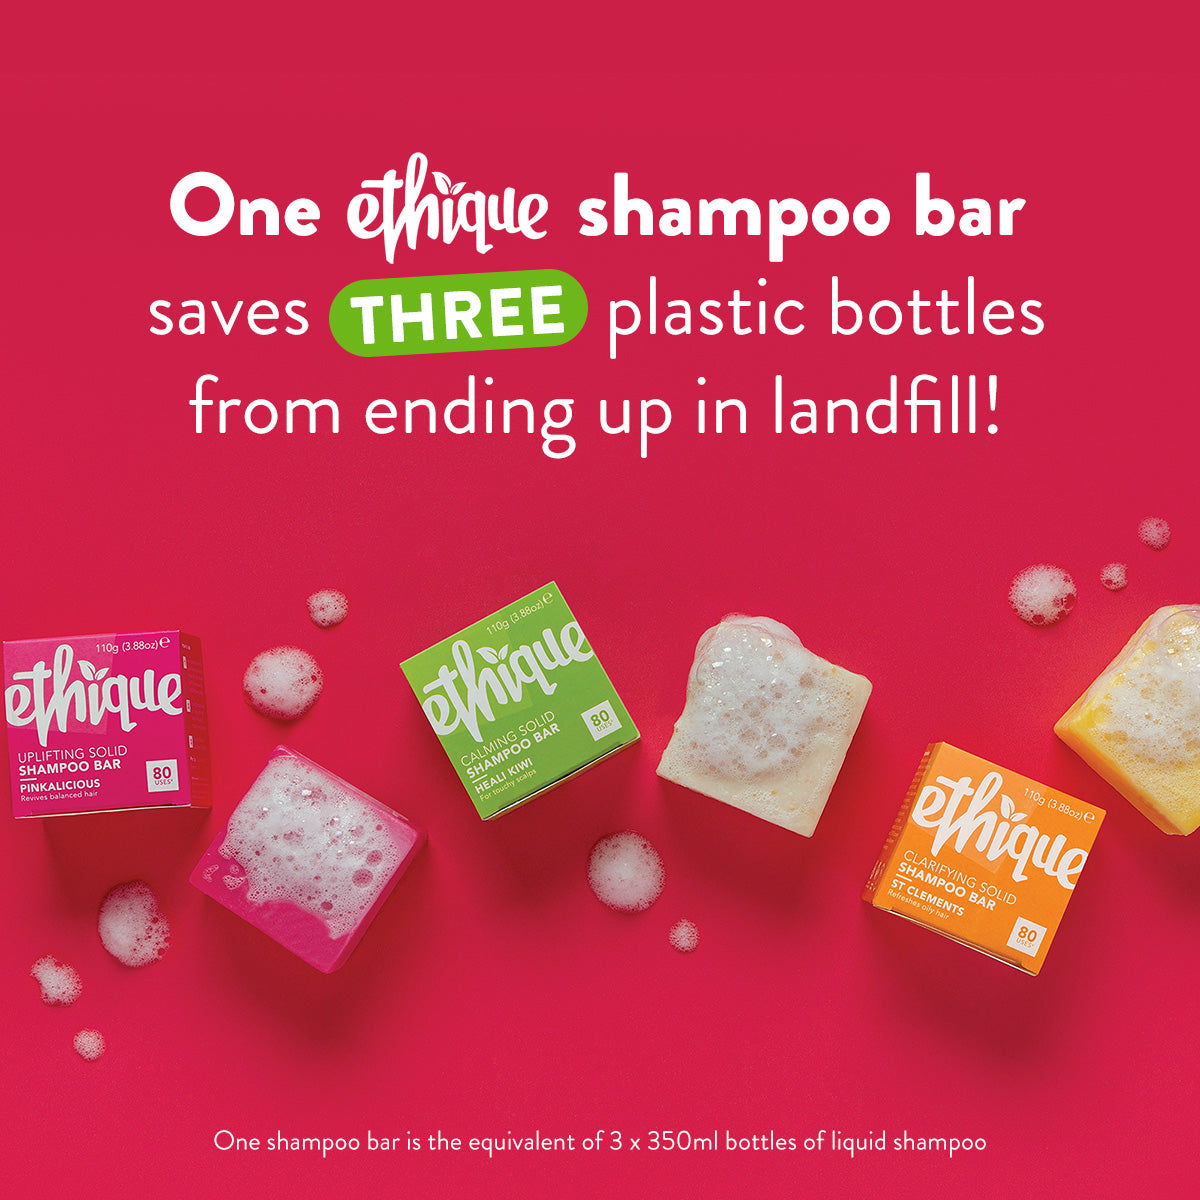 Tip-to-Toe™ 2-In-1 Solid Shampoo & Shaving Bar